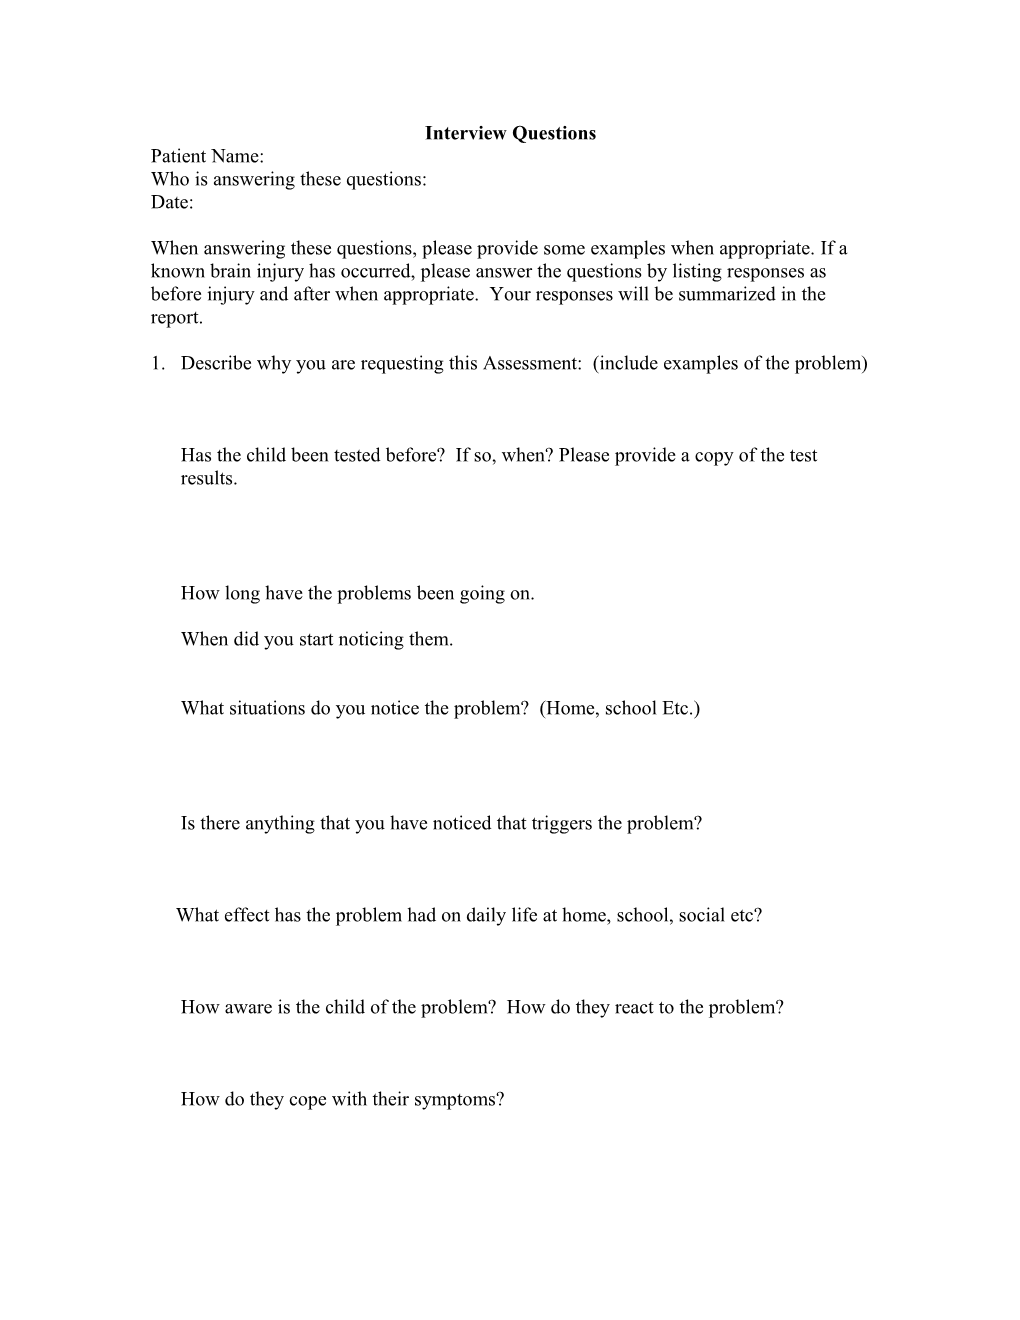 Interview Questions for Parents for Assessing Children